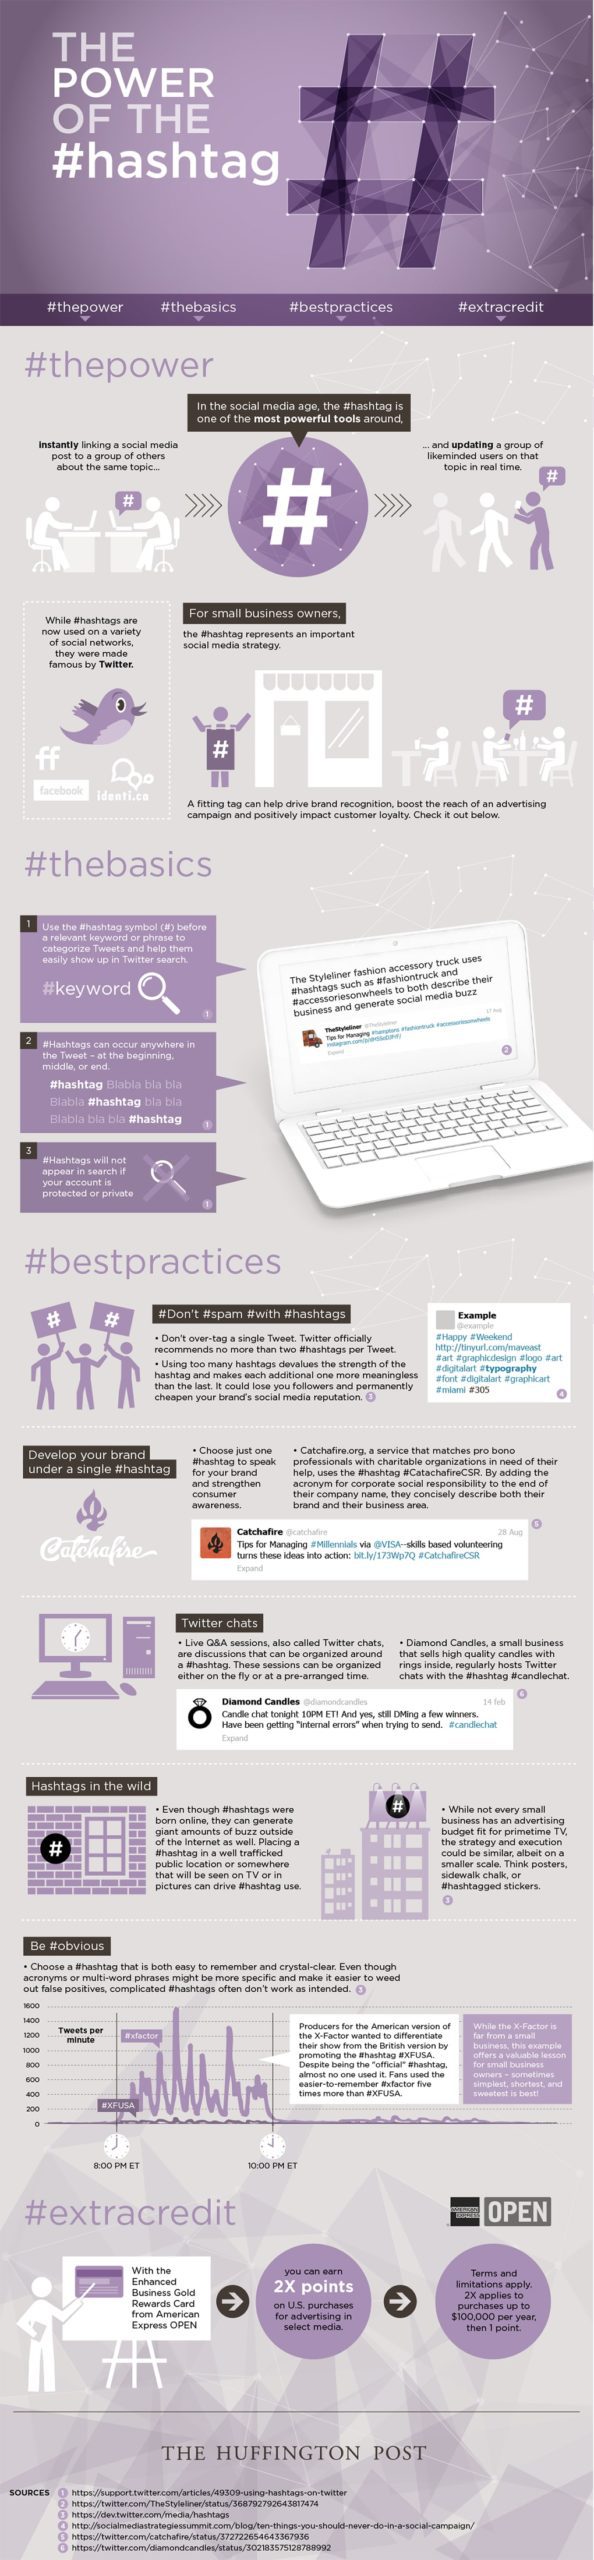 business hashtag infographic